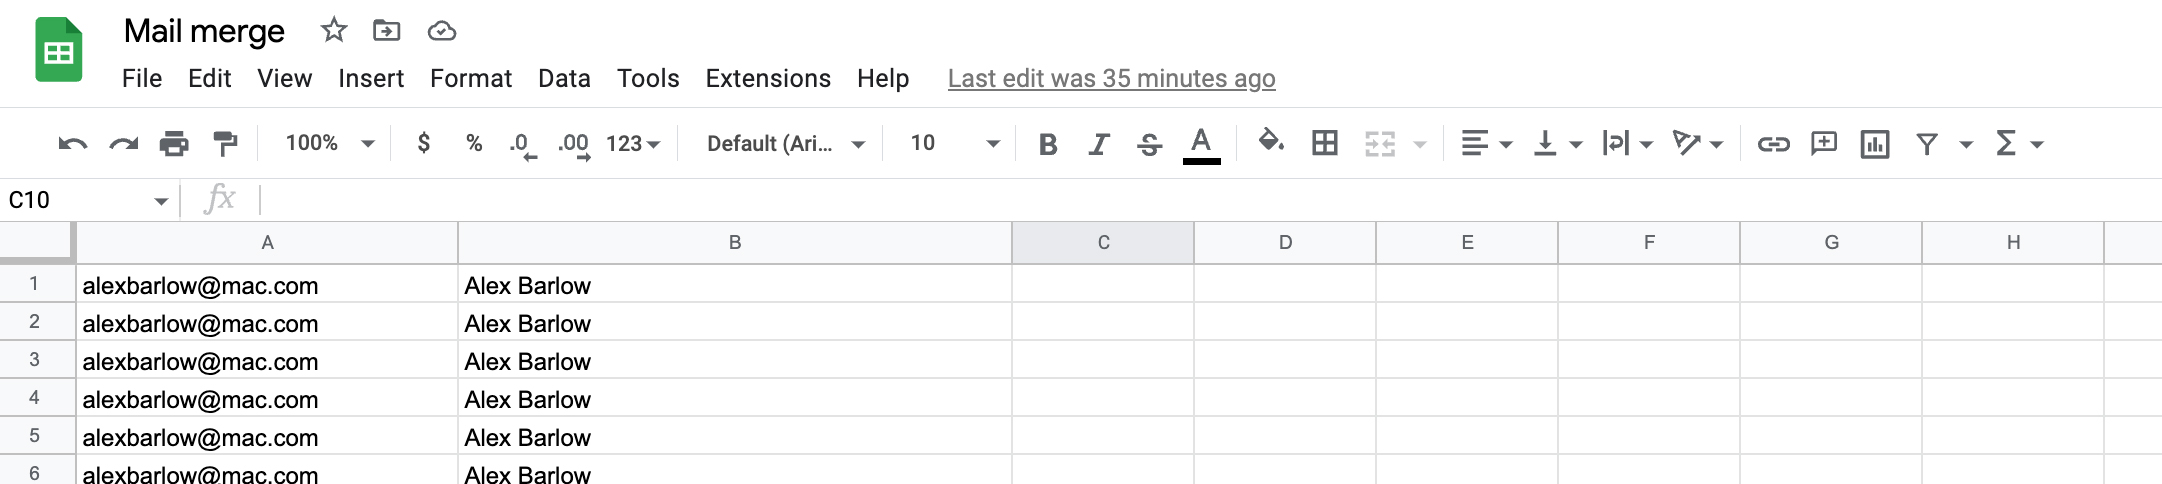 Google sheet for creating a mail merge